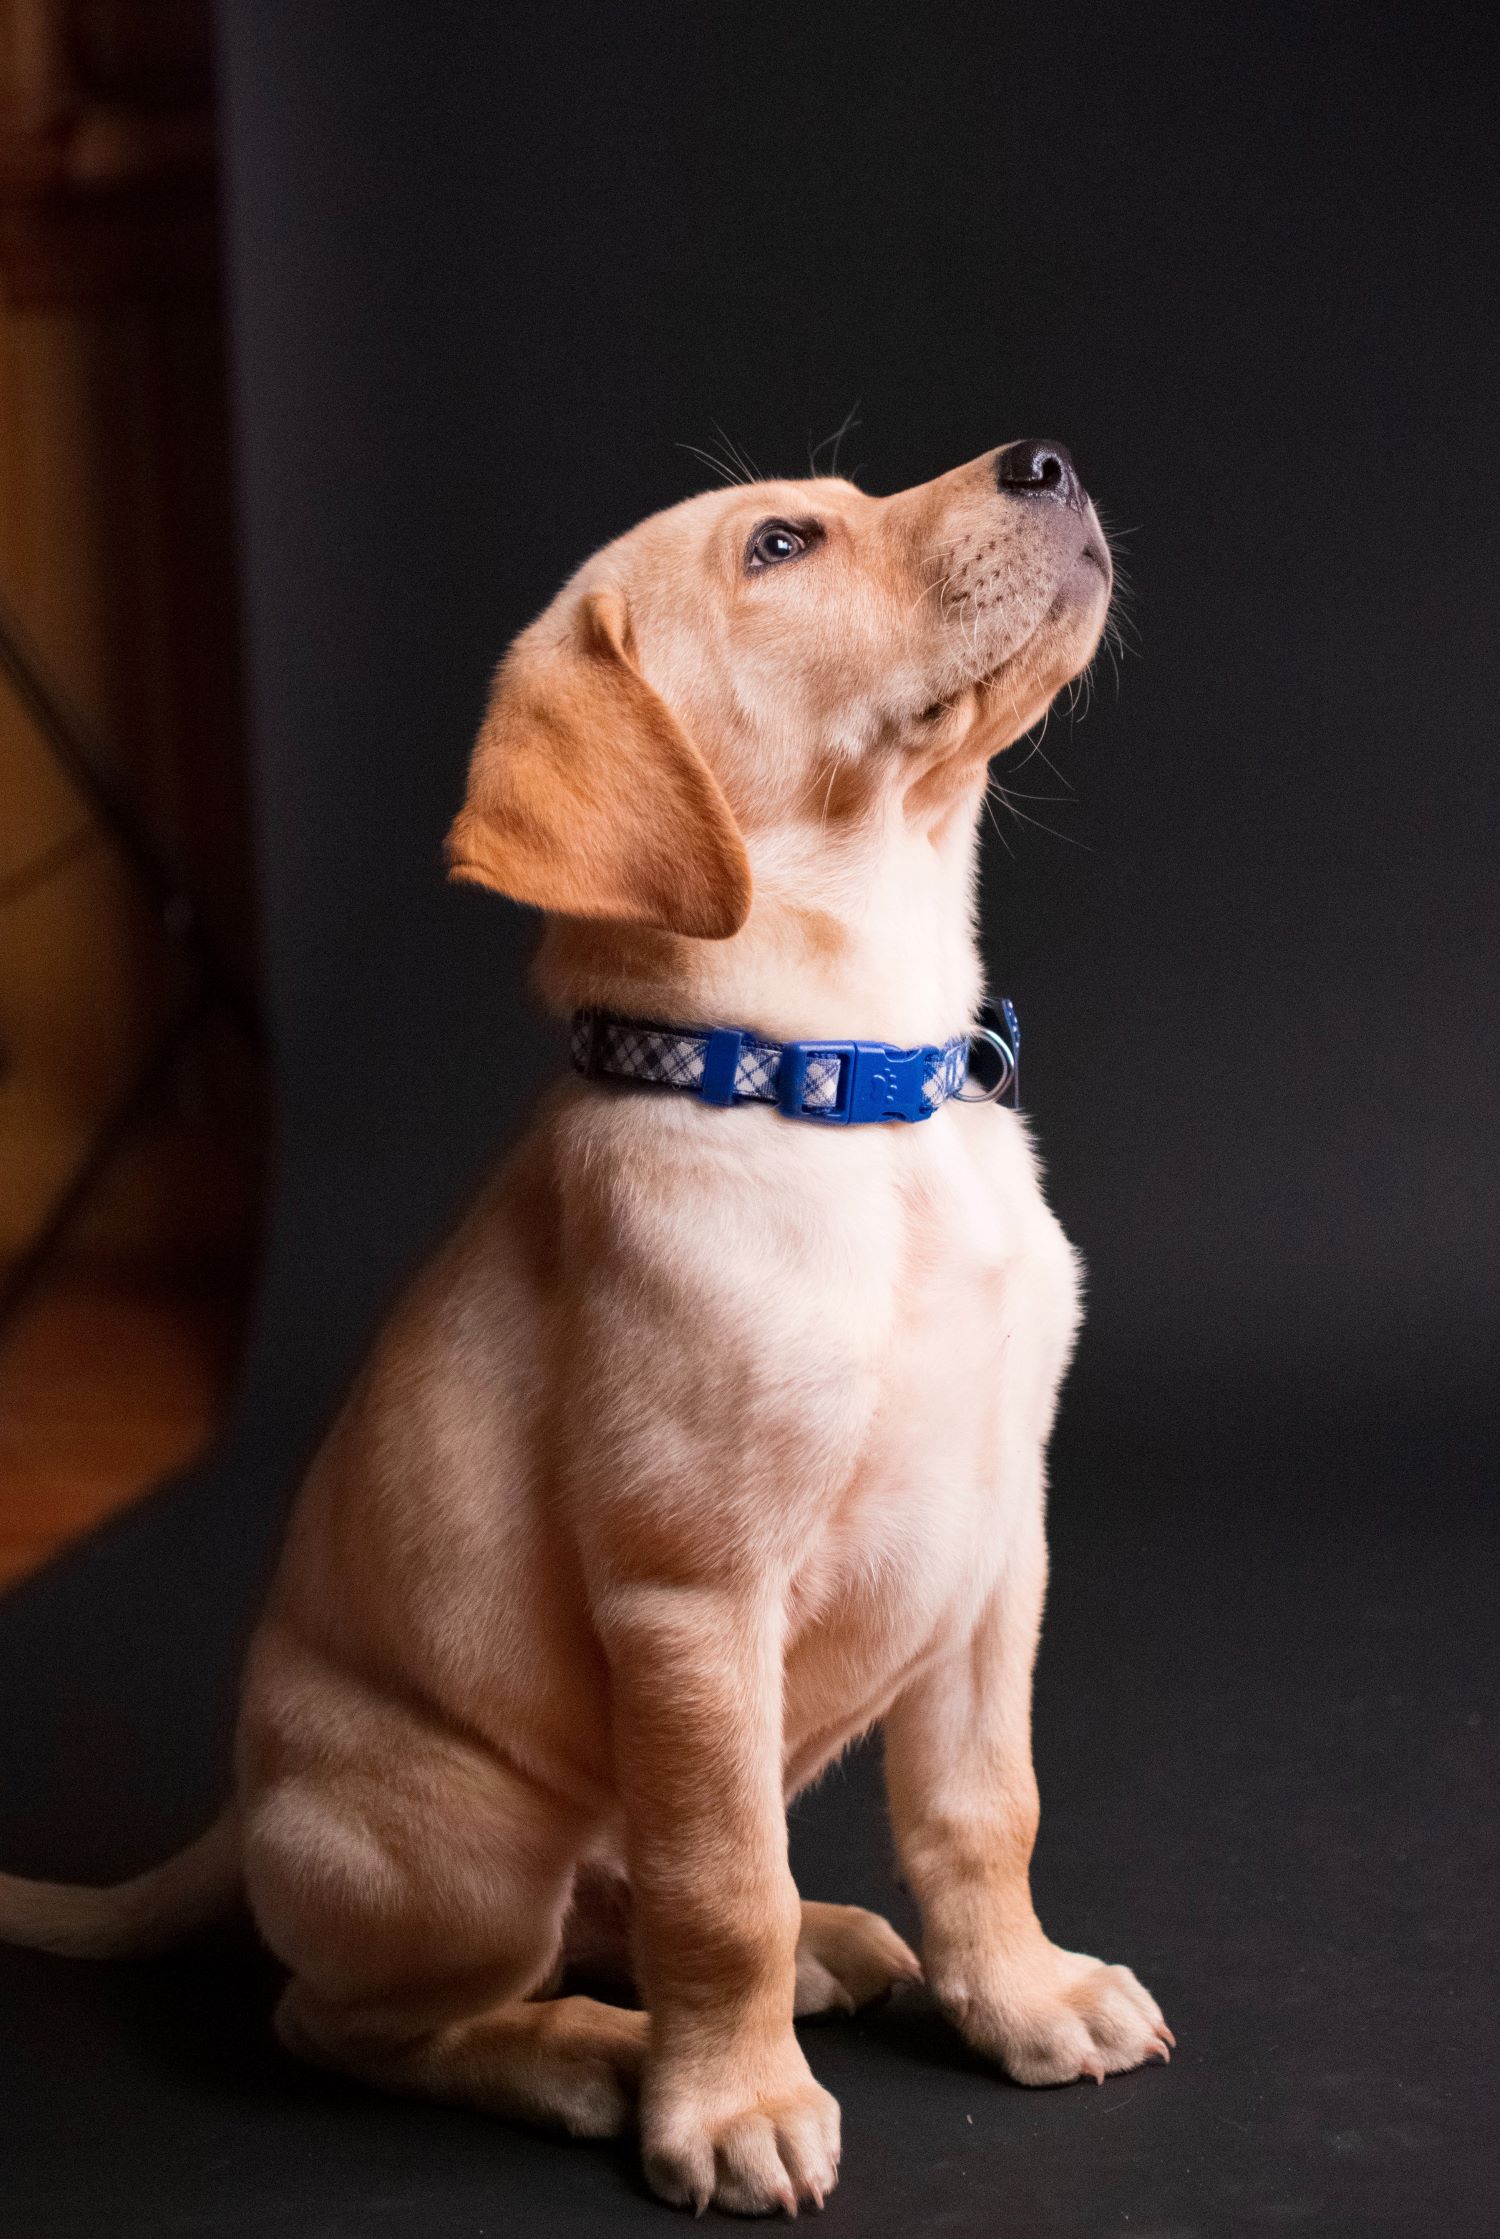 An image of a dog with a blue collar.